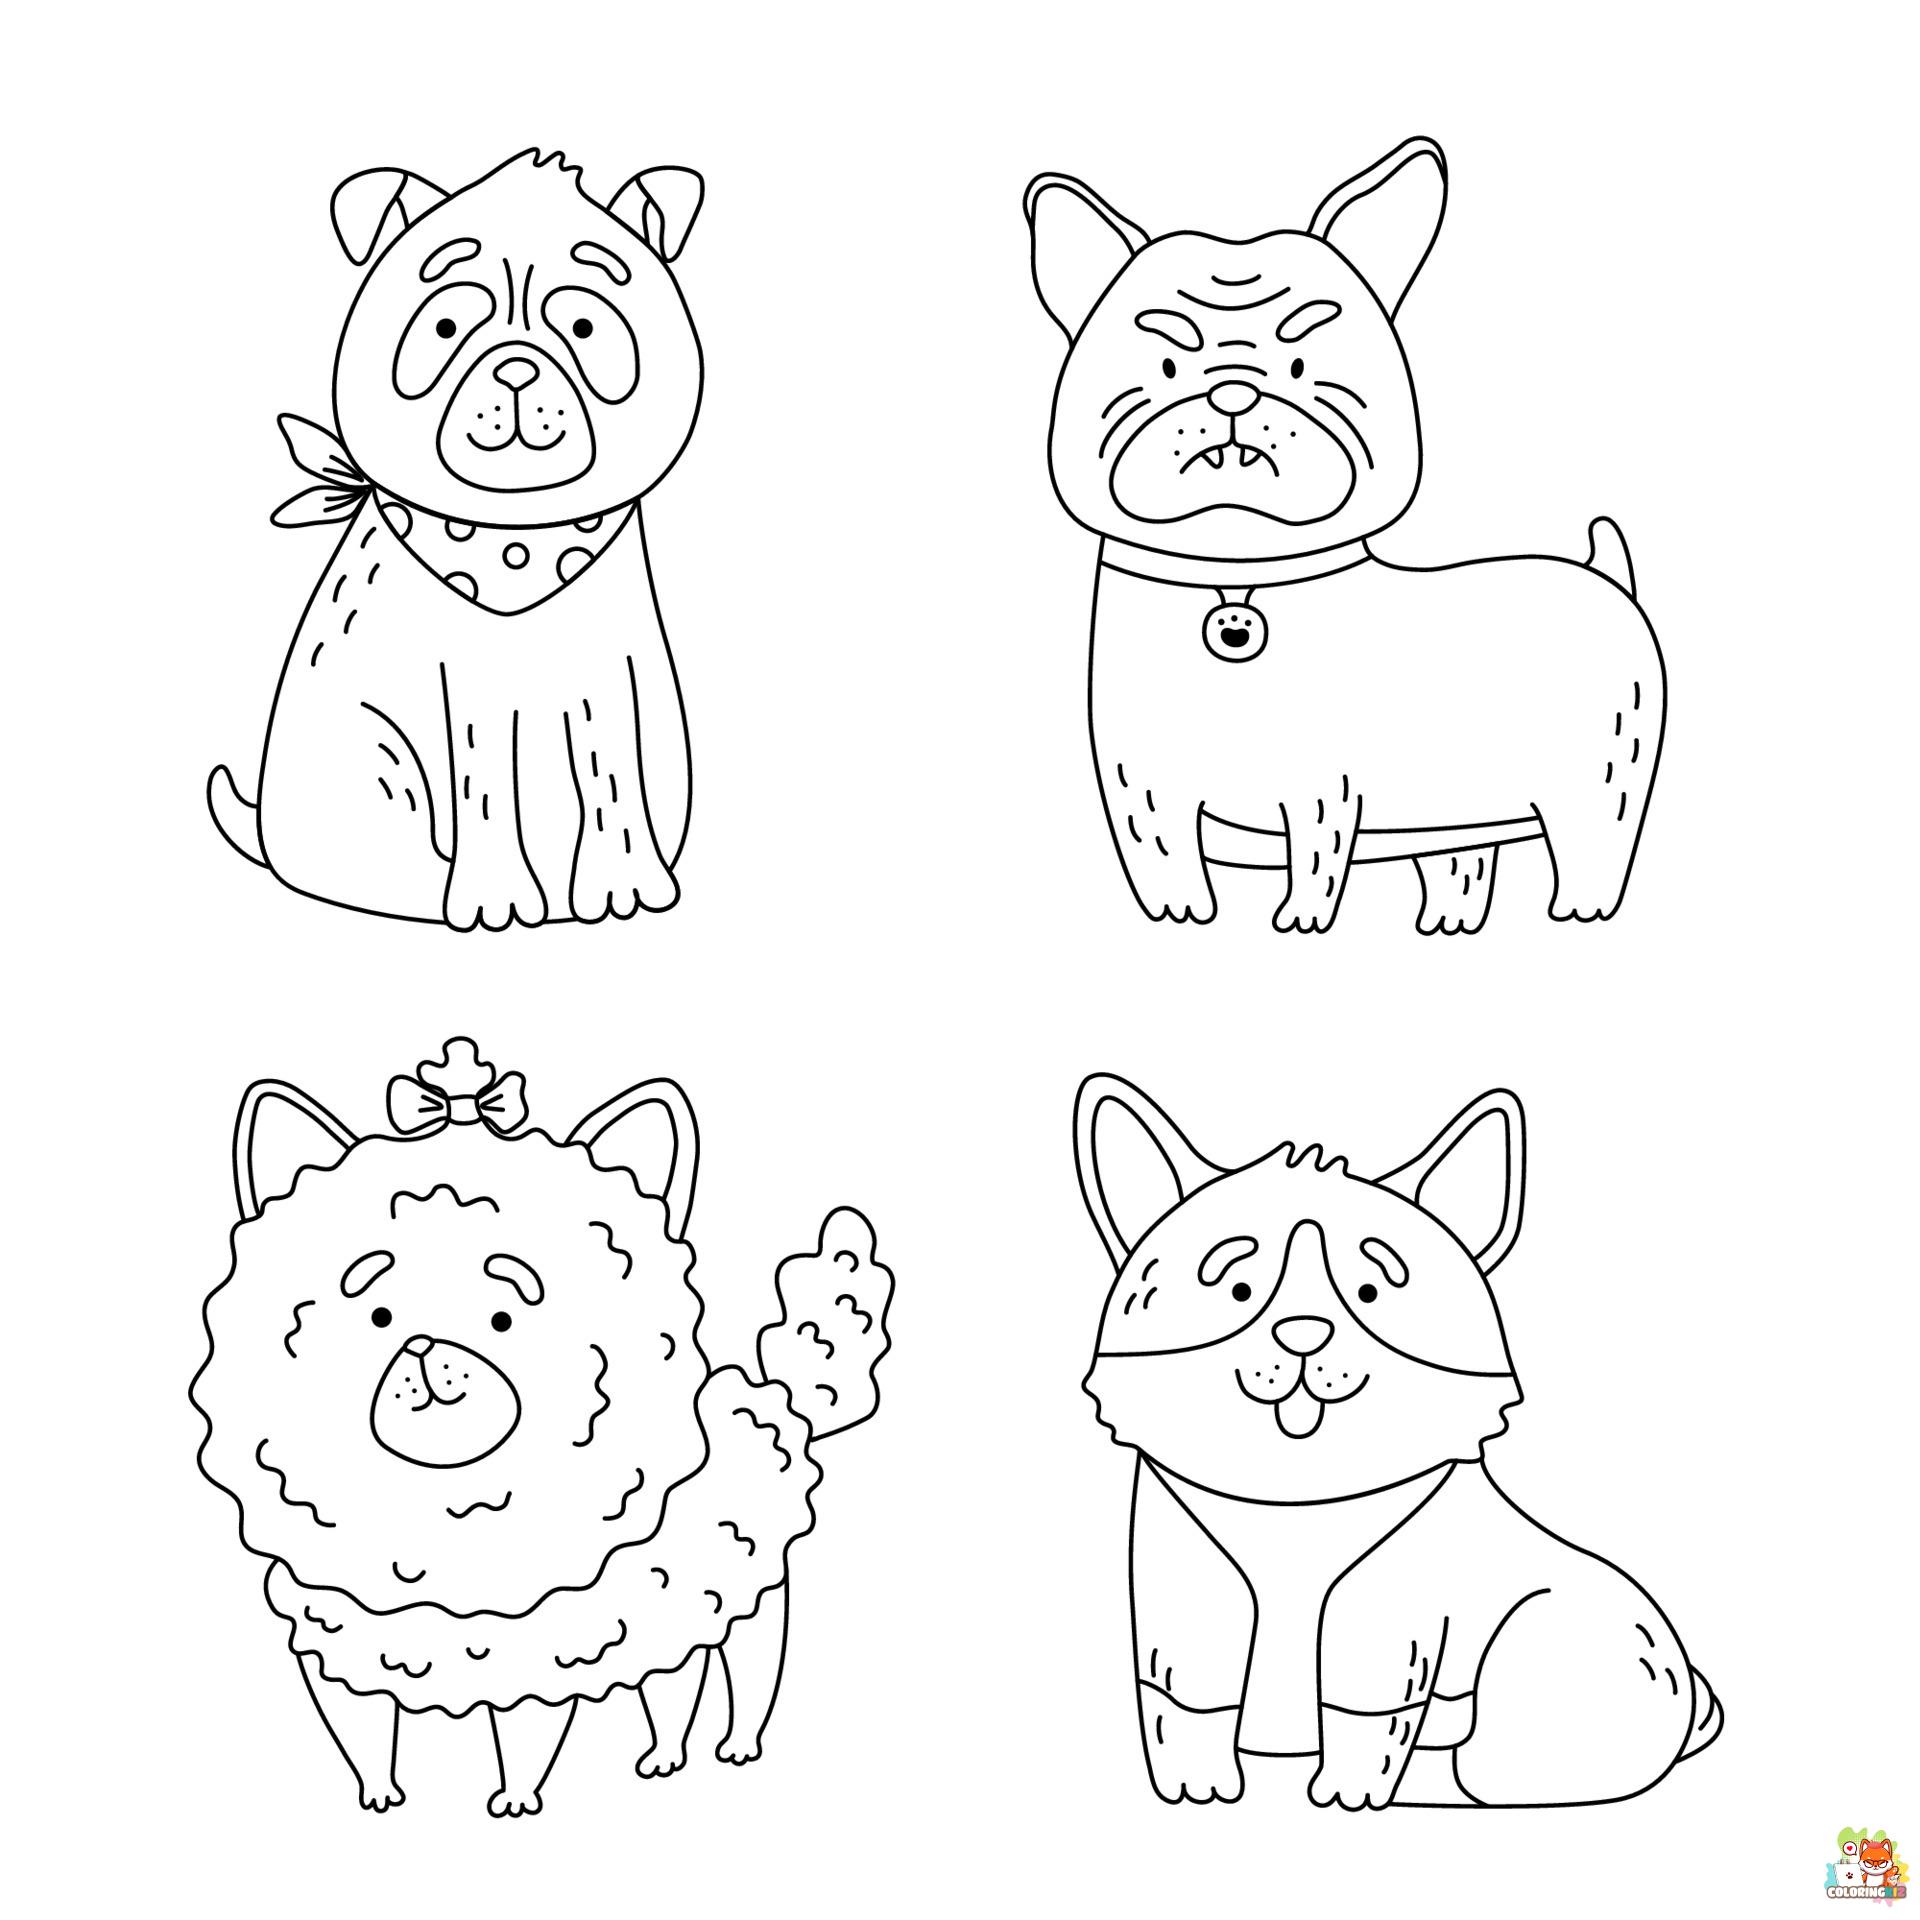 Pomeranian and Chihuahua Coloring Pages 10